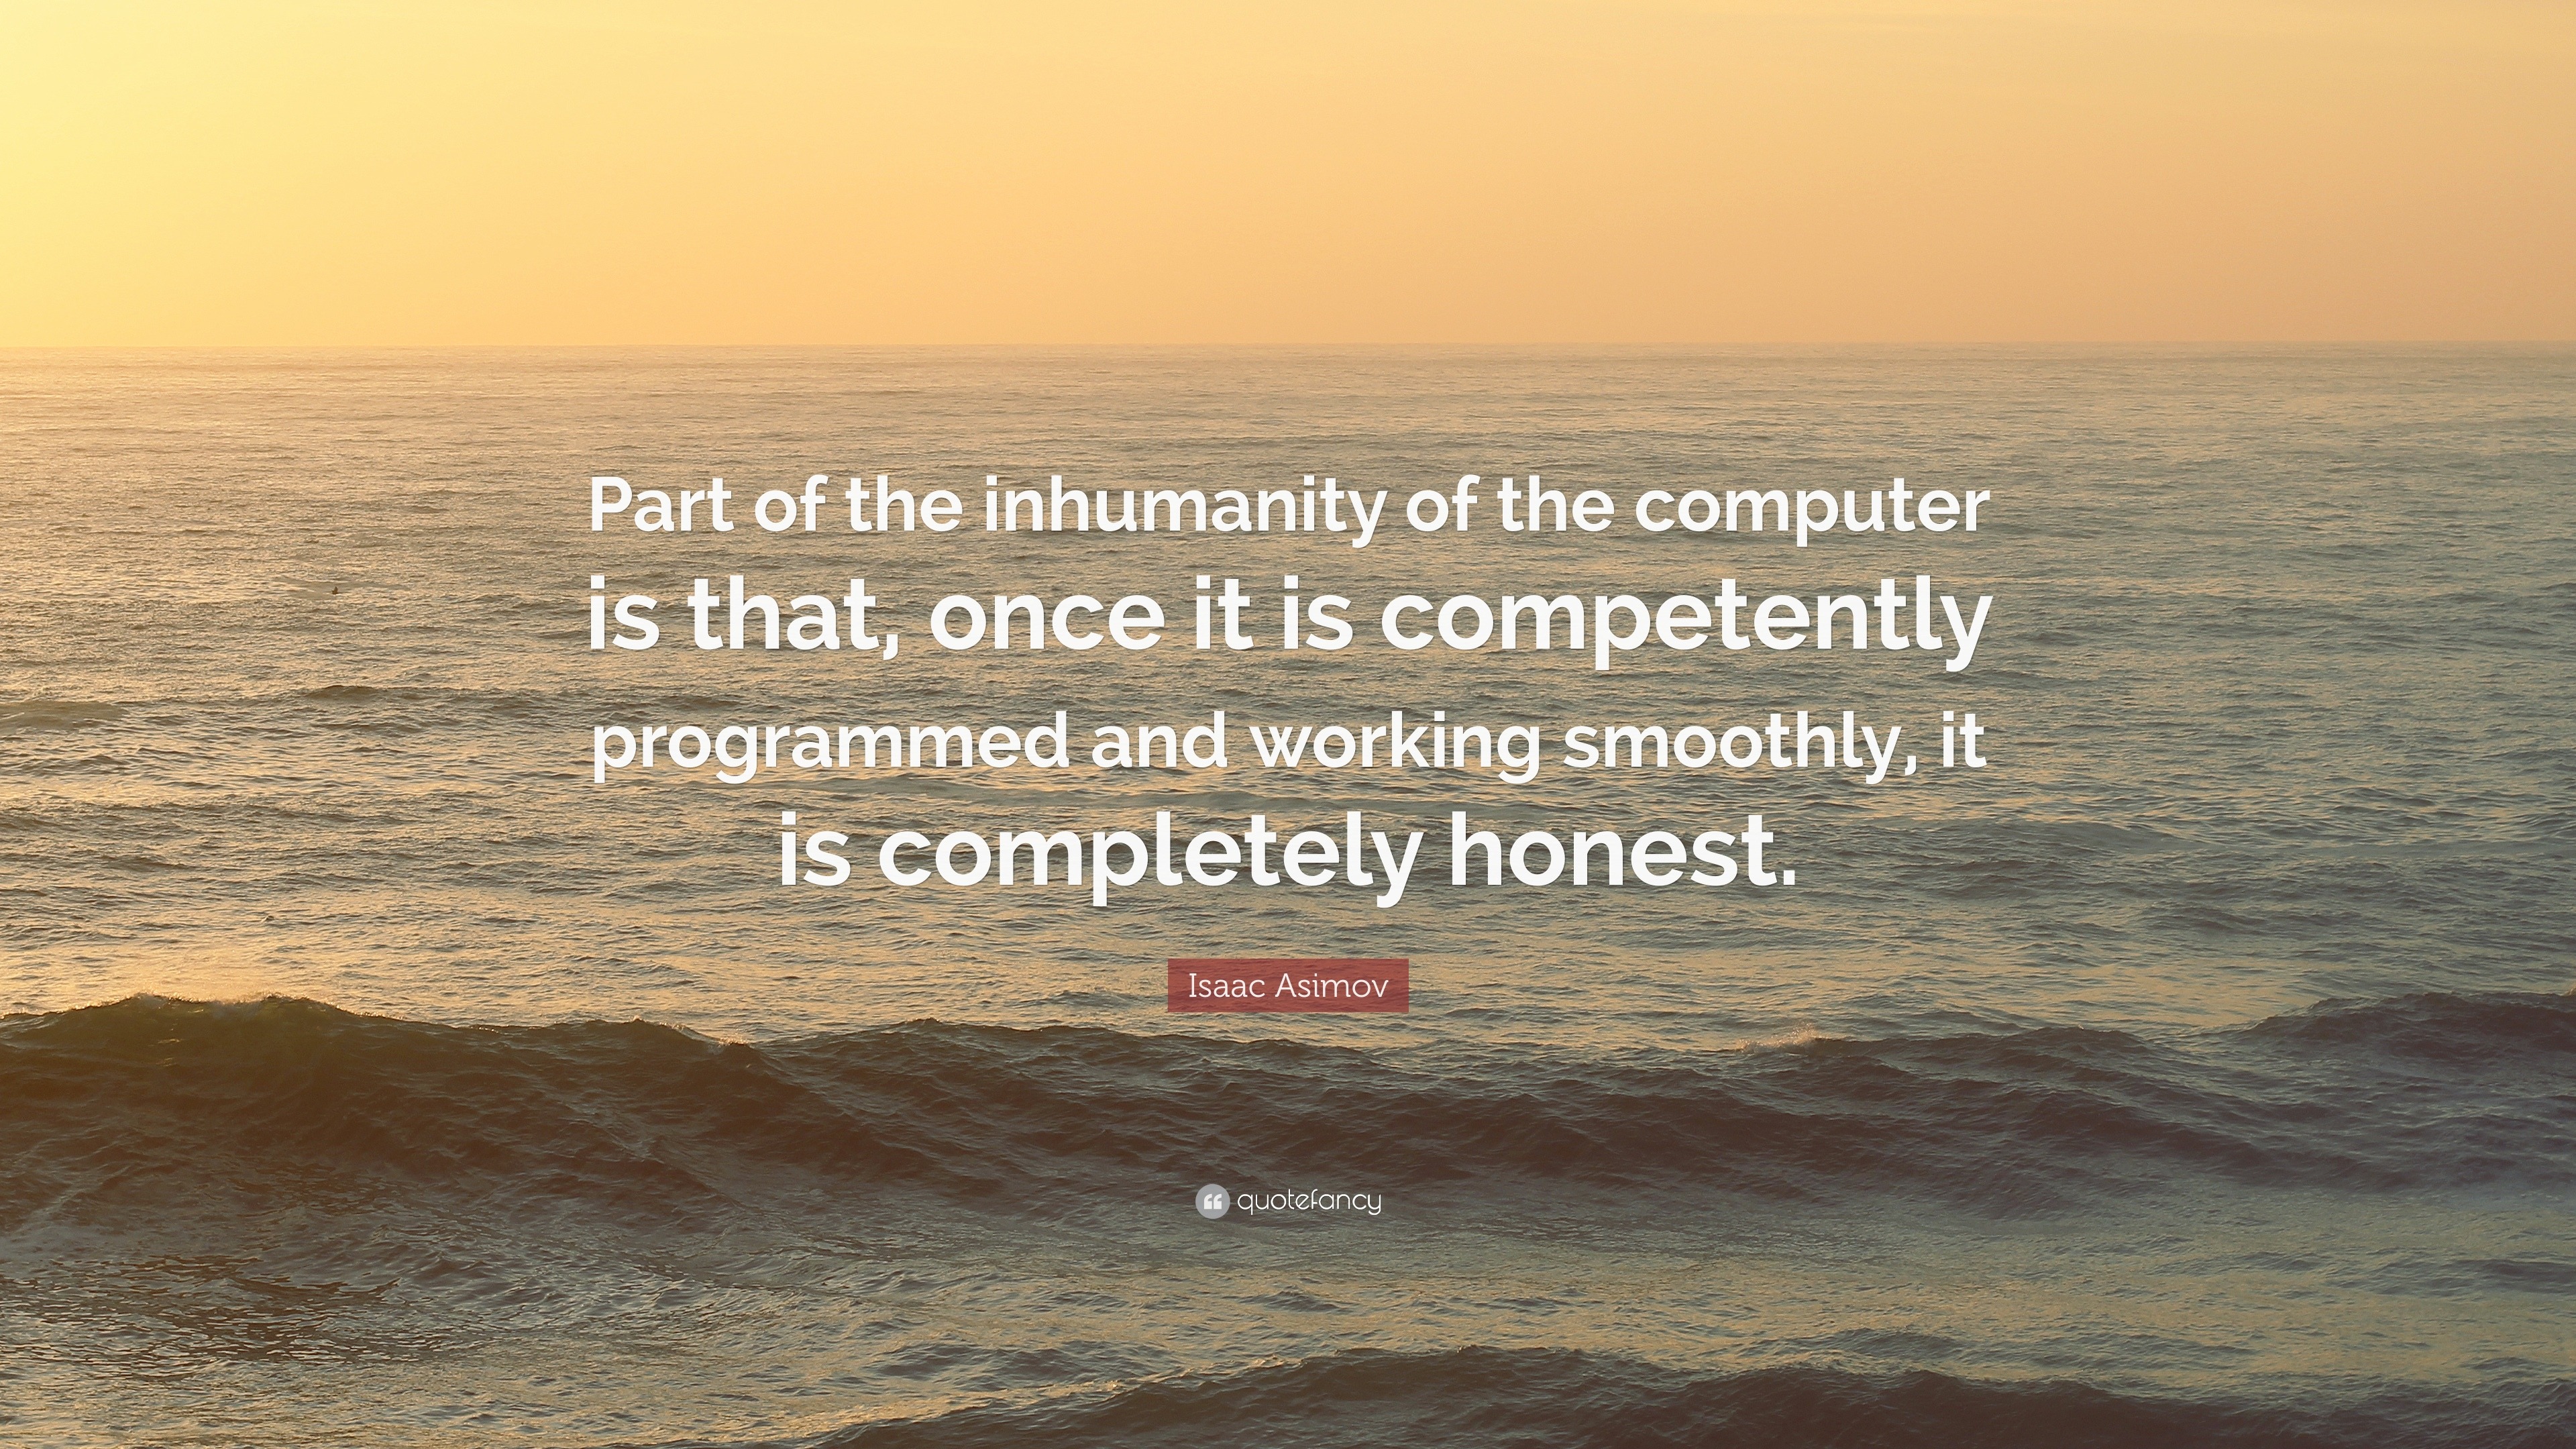 Isaac Asimov Quote “Part of the inhumanity of the computer is that